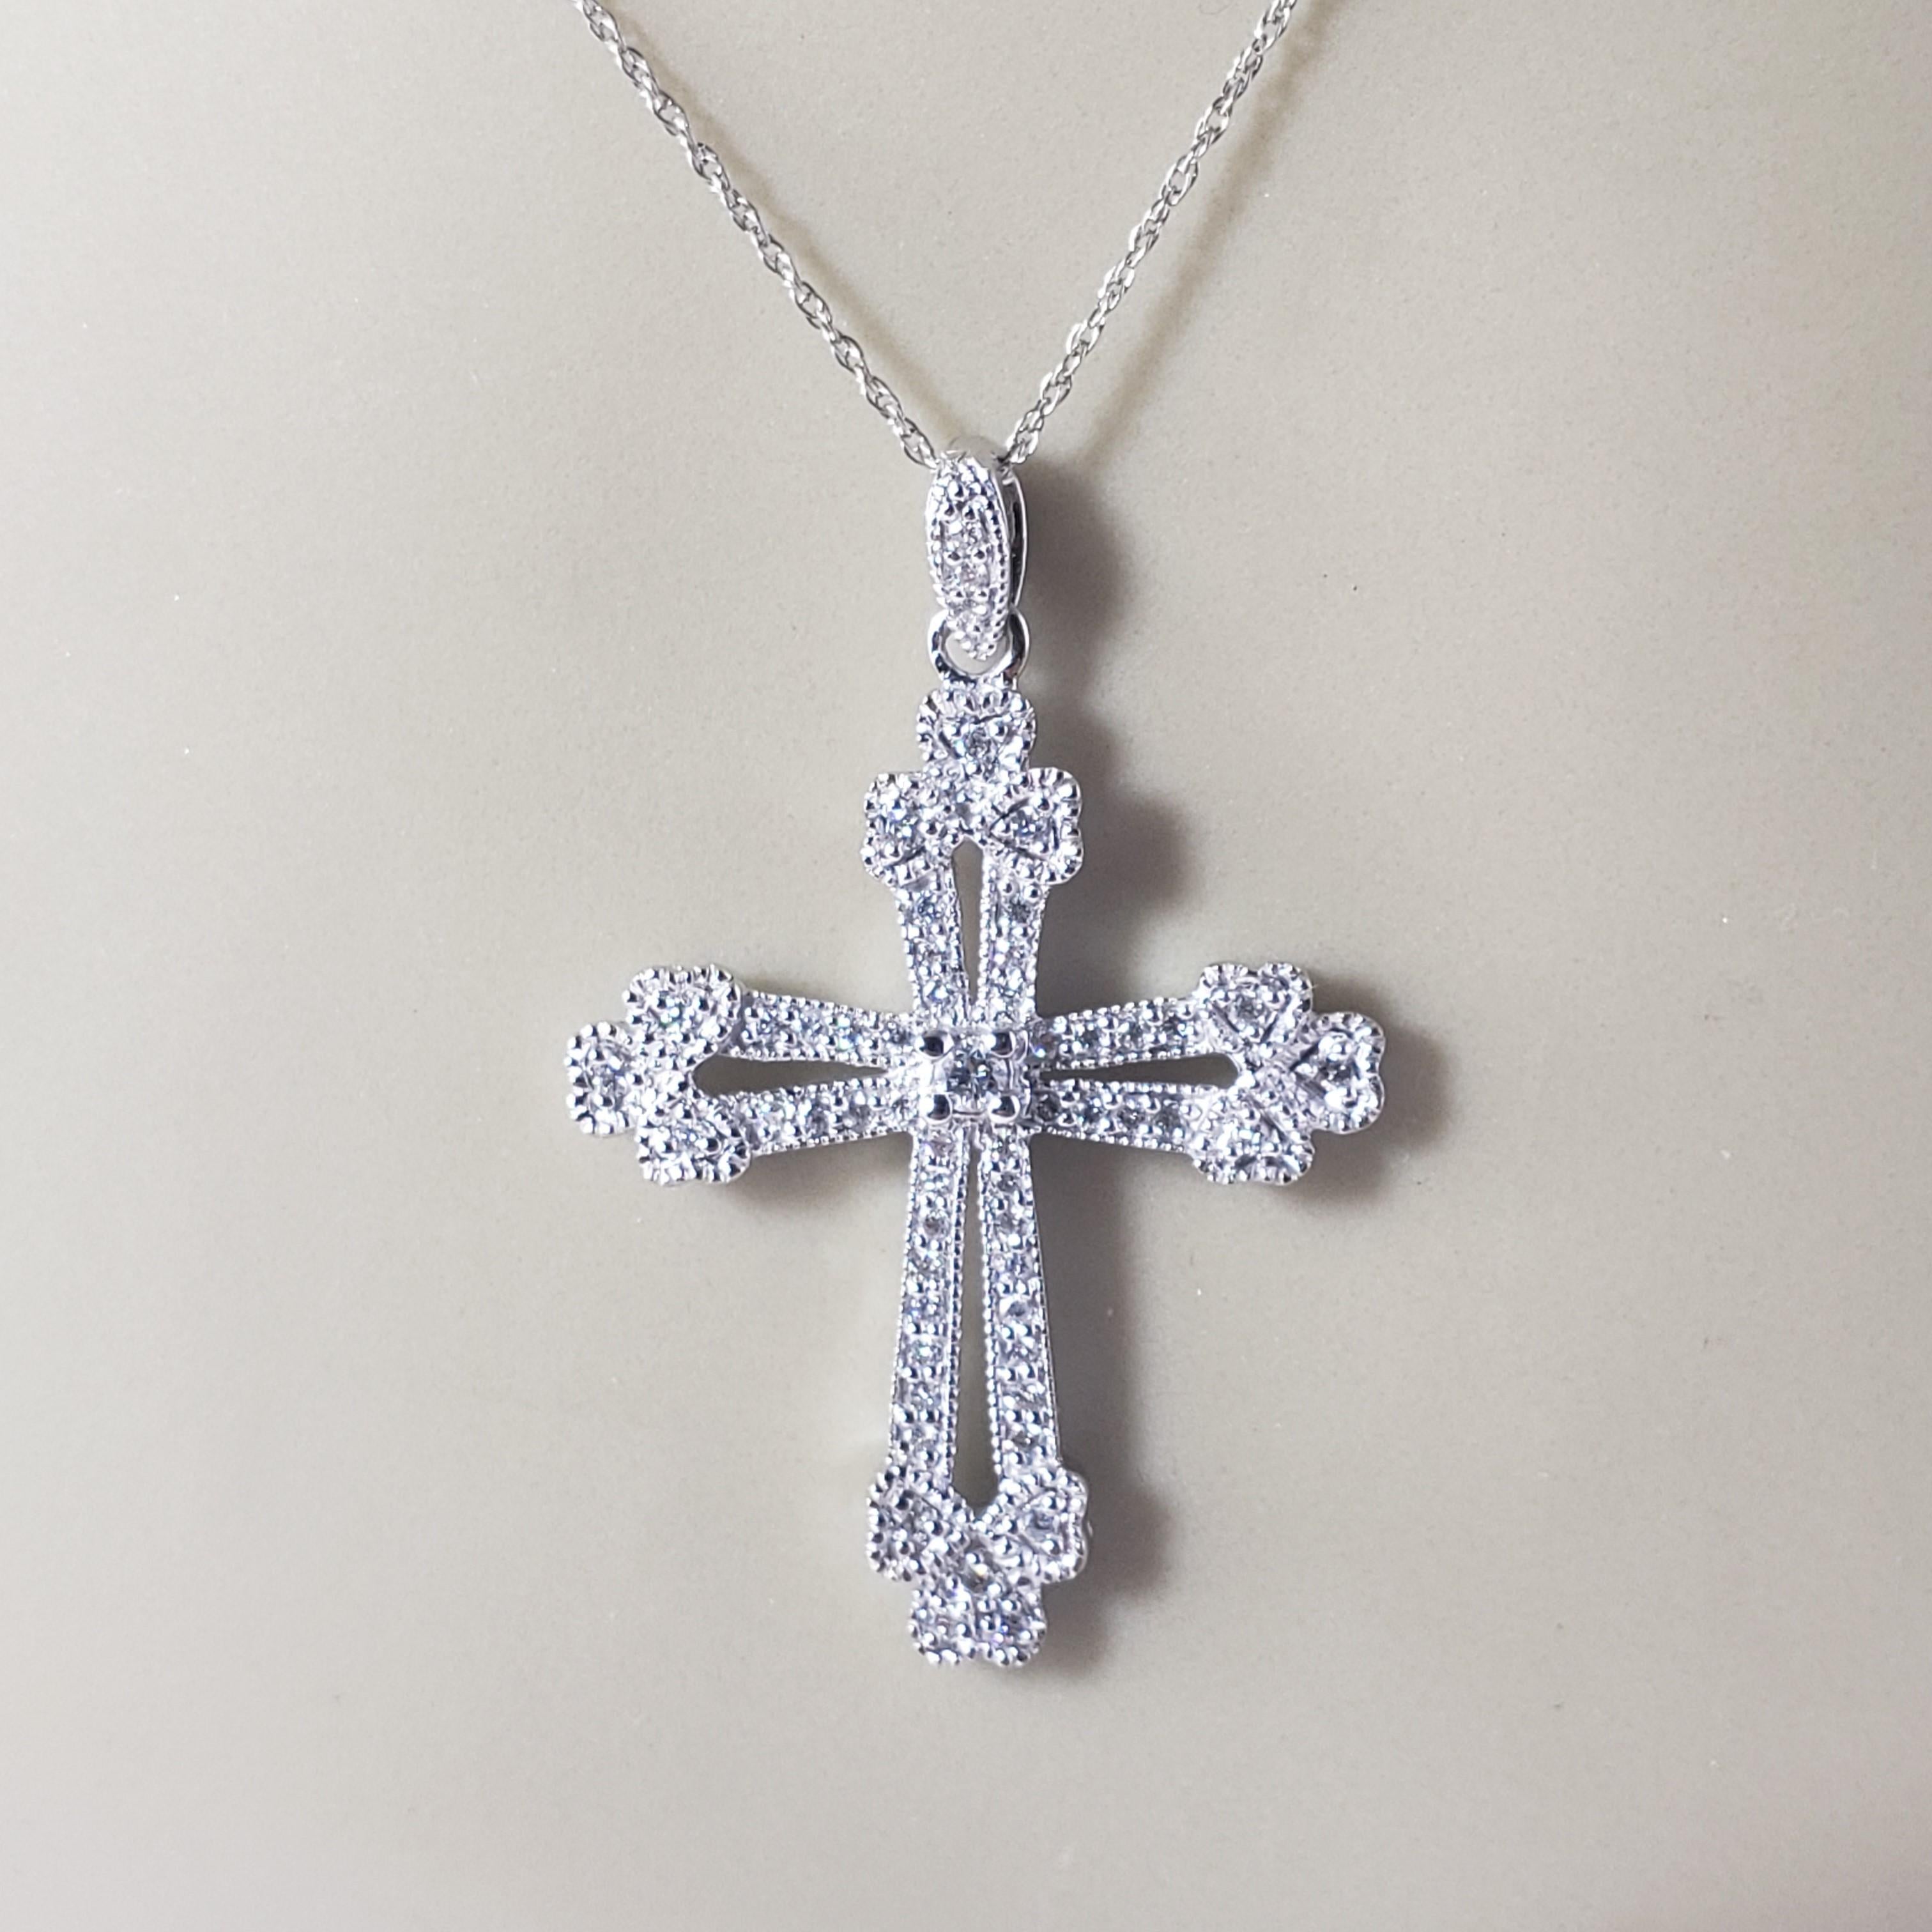 14 Karat White Gold and Diamond Cross Pendant Necklace #16633 For Sale 4